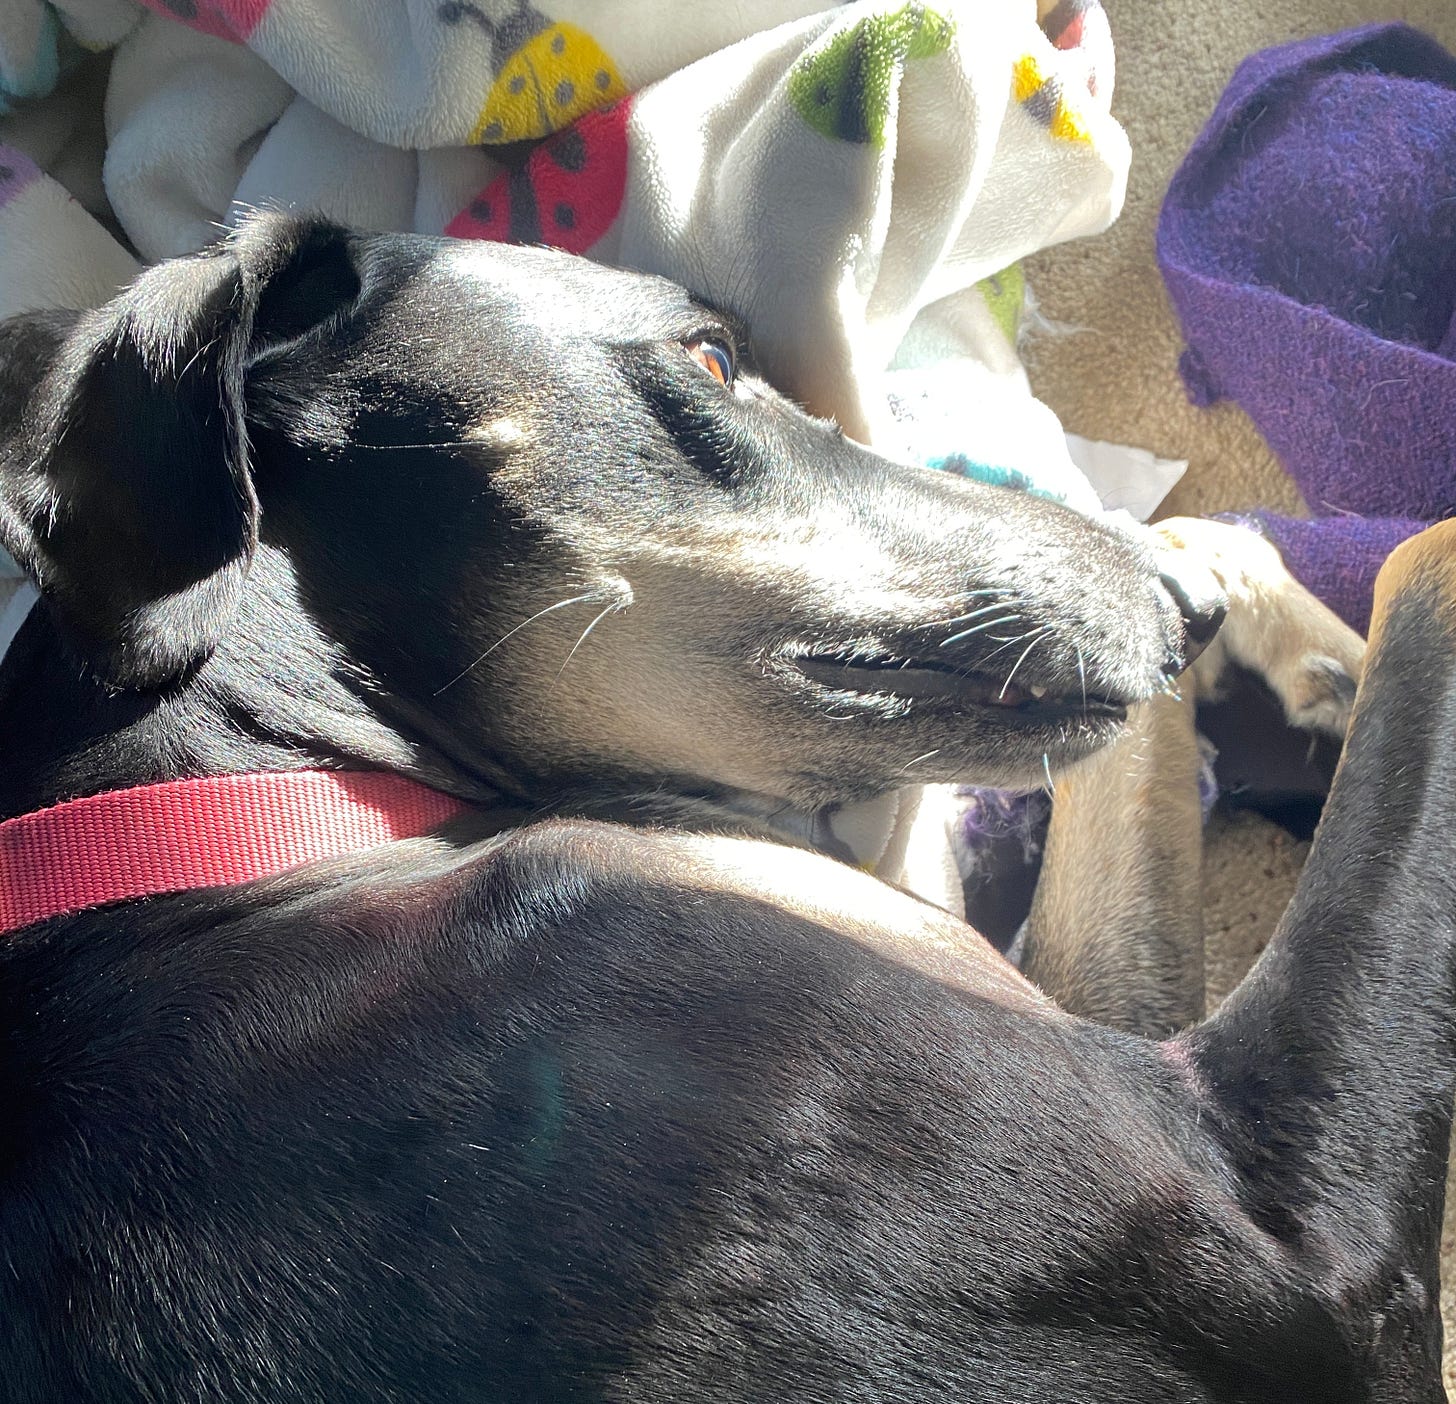 A black dog's head lies in the sunlight